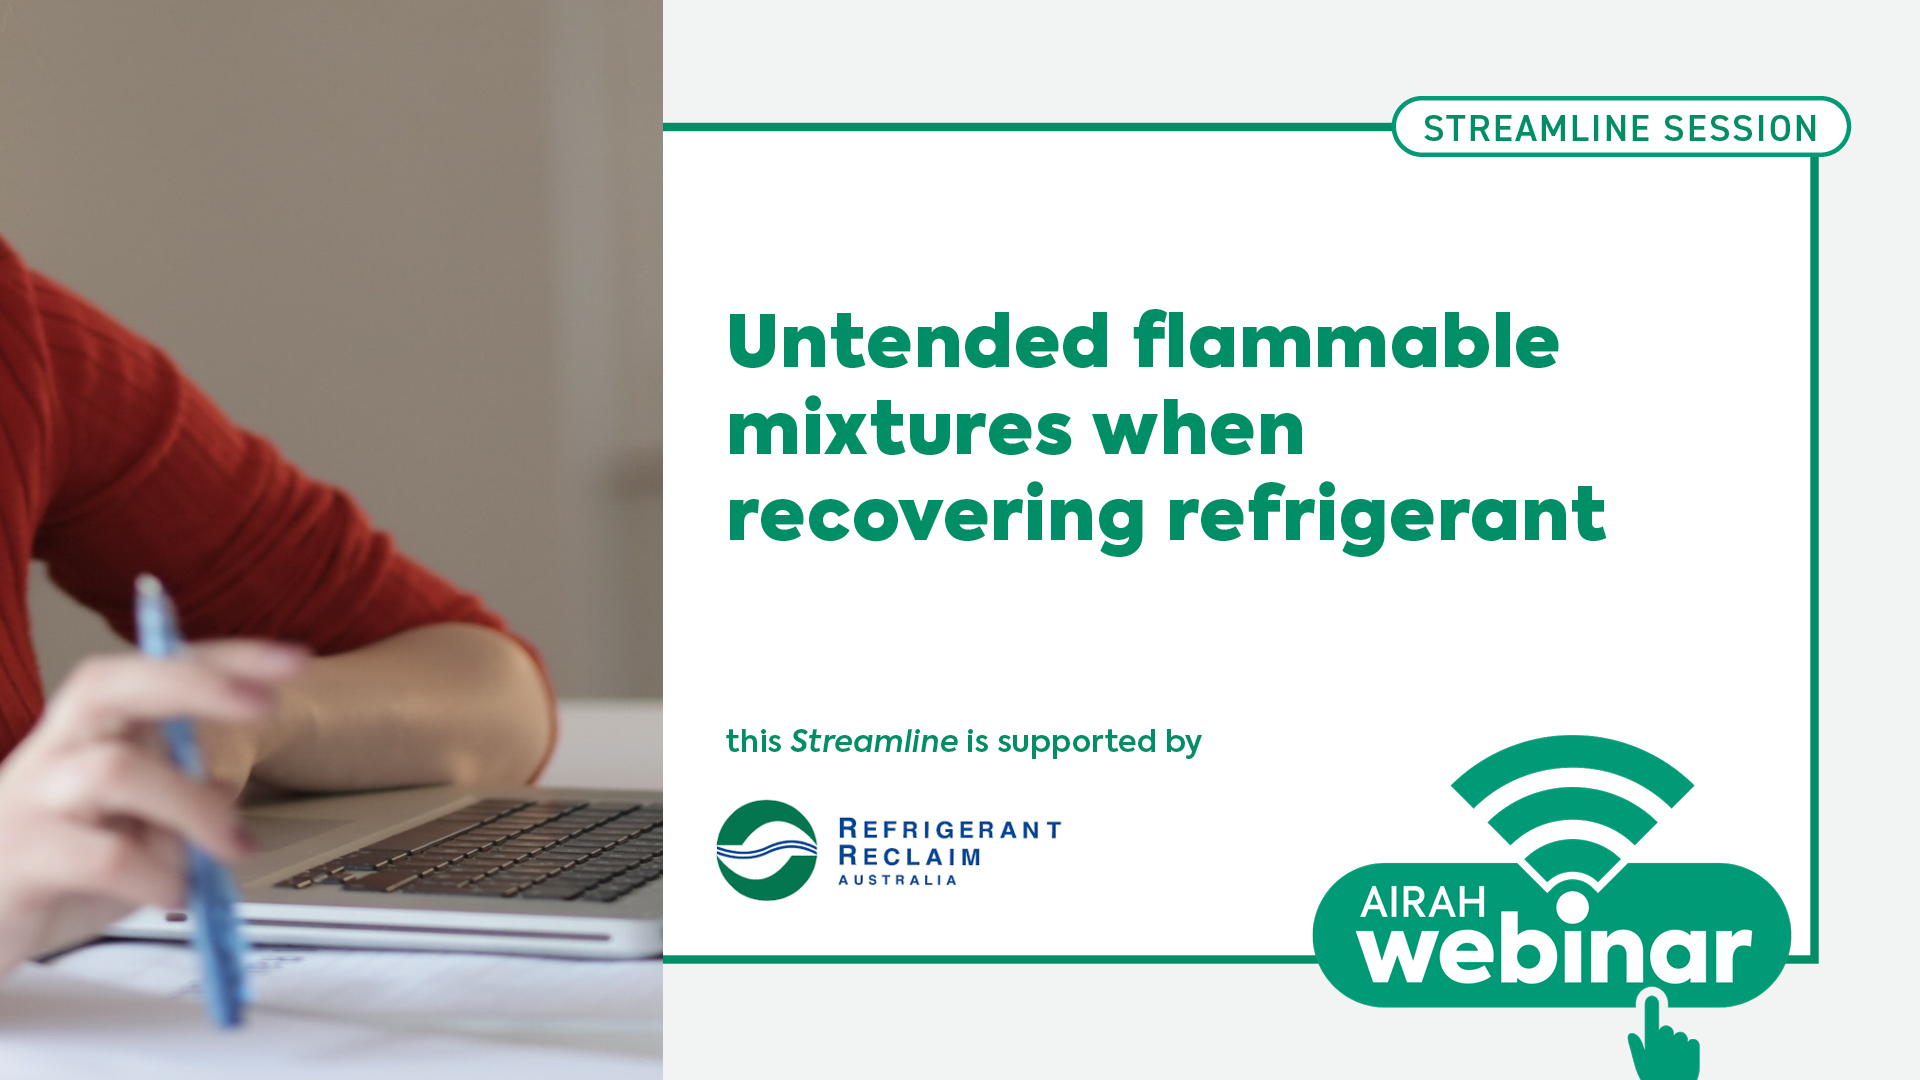 AIRAH Streamline – Untended flammable mixtures when recovering refrigerant